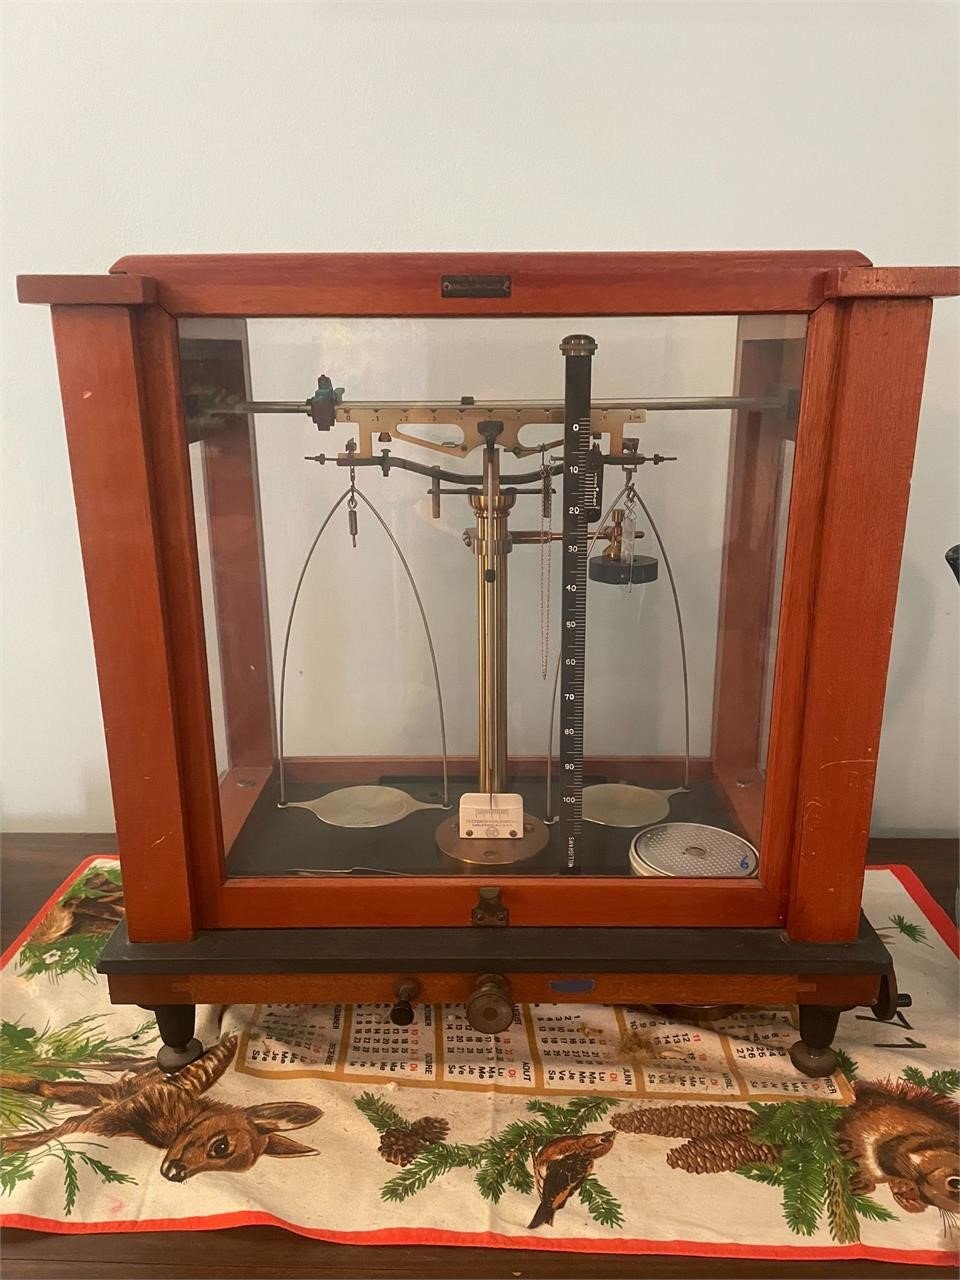 Antique apothecary scale with weights